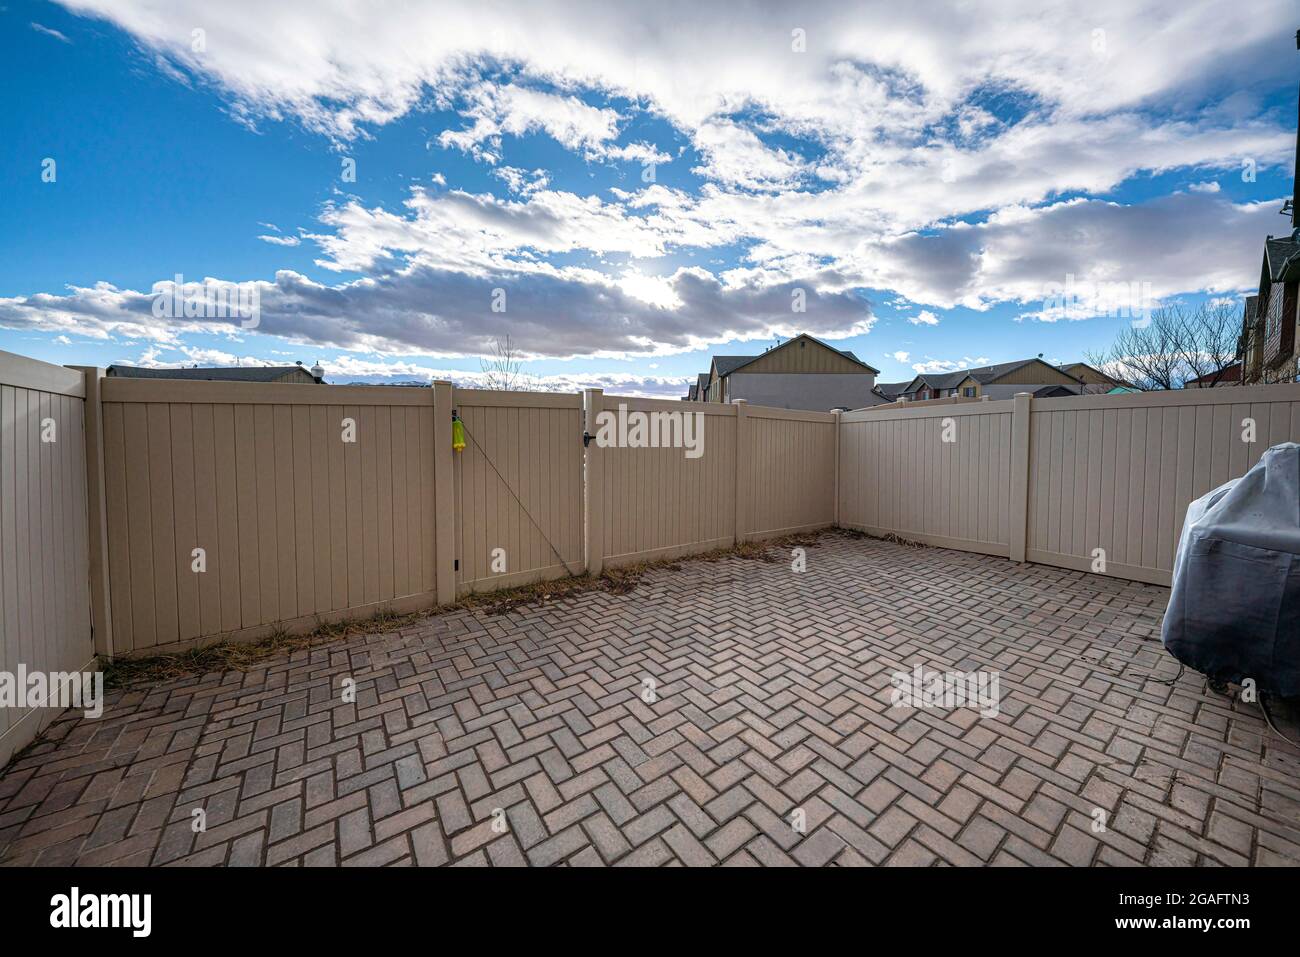 Backyard of a house with fence and bricks and a view of vibrant sky Stock Photo